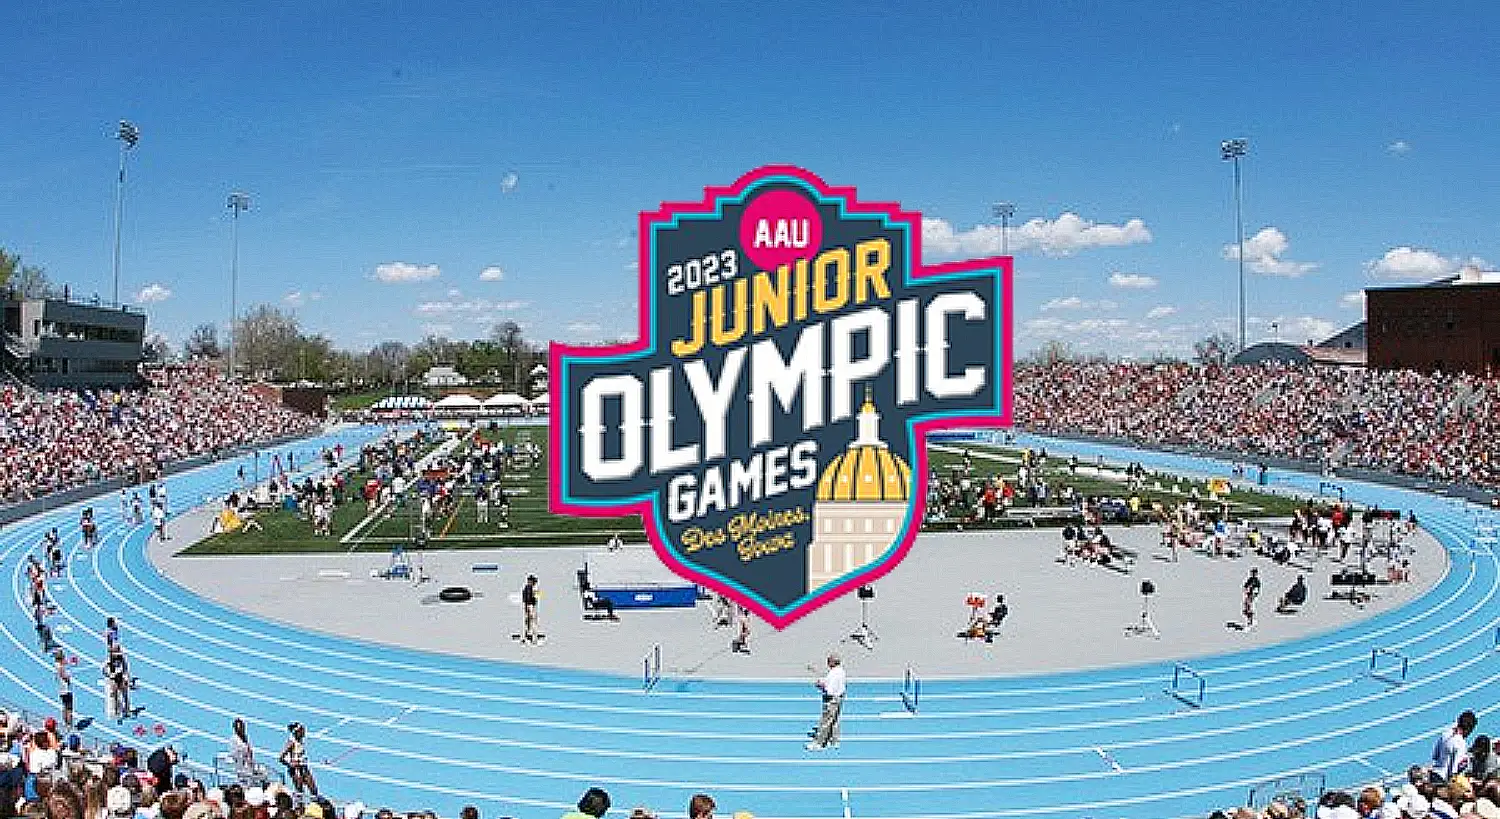 How to watch the AAU Junior Olympics Track and Field Games live stream?